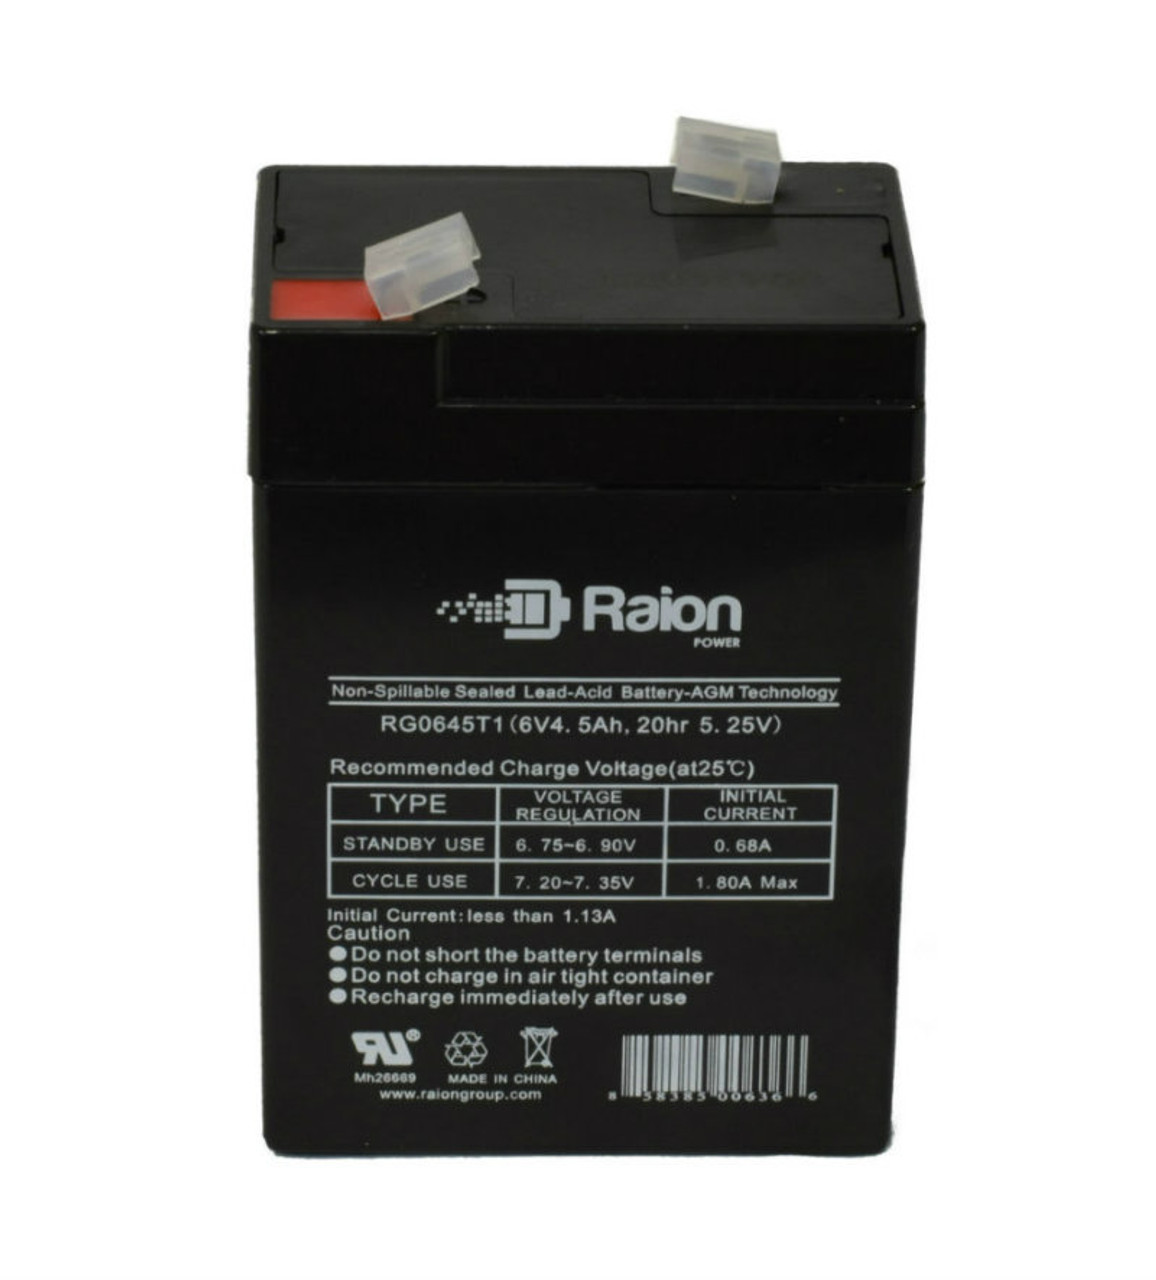 Raion Power RG0645T1 Replacement Battery Cartridge for Kid Trax KT1123KM Disney Minnie Mouse Quad Hot Pink